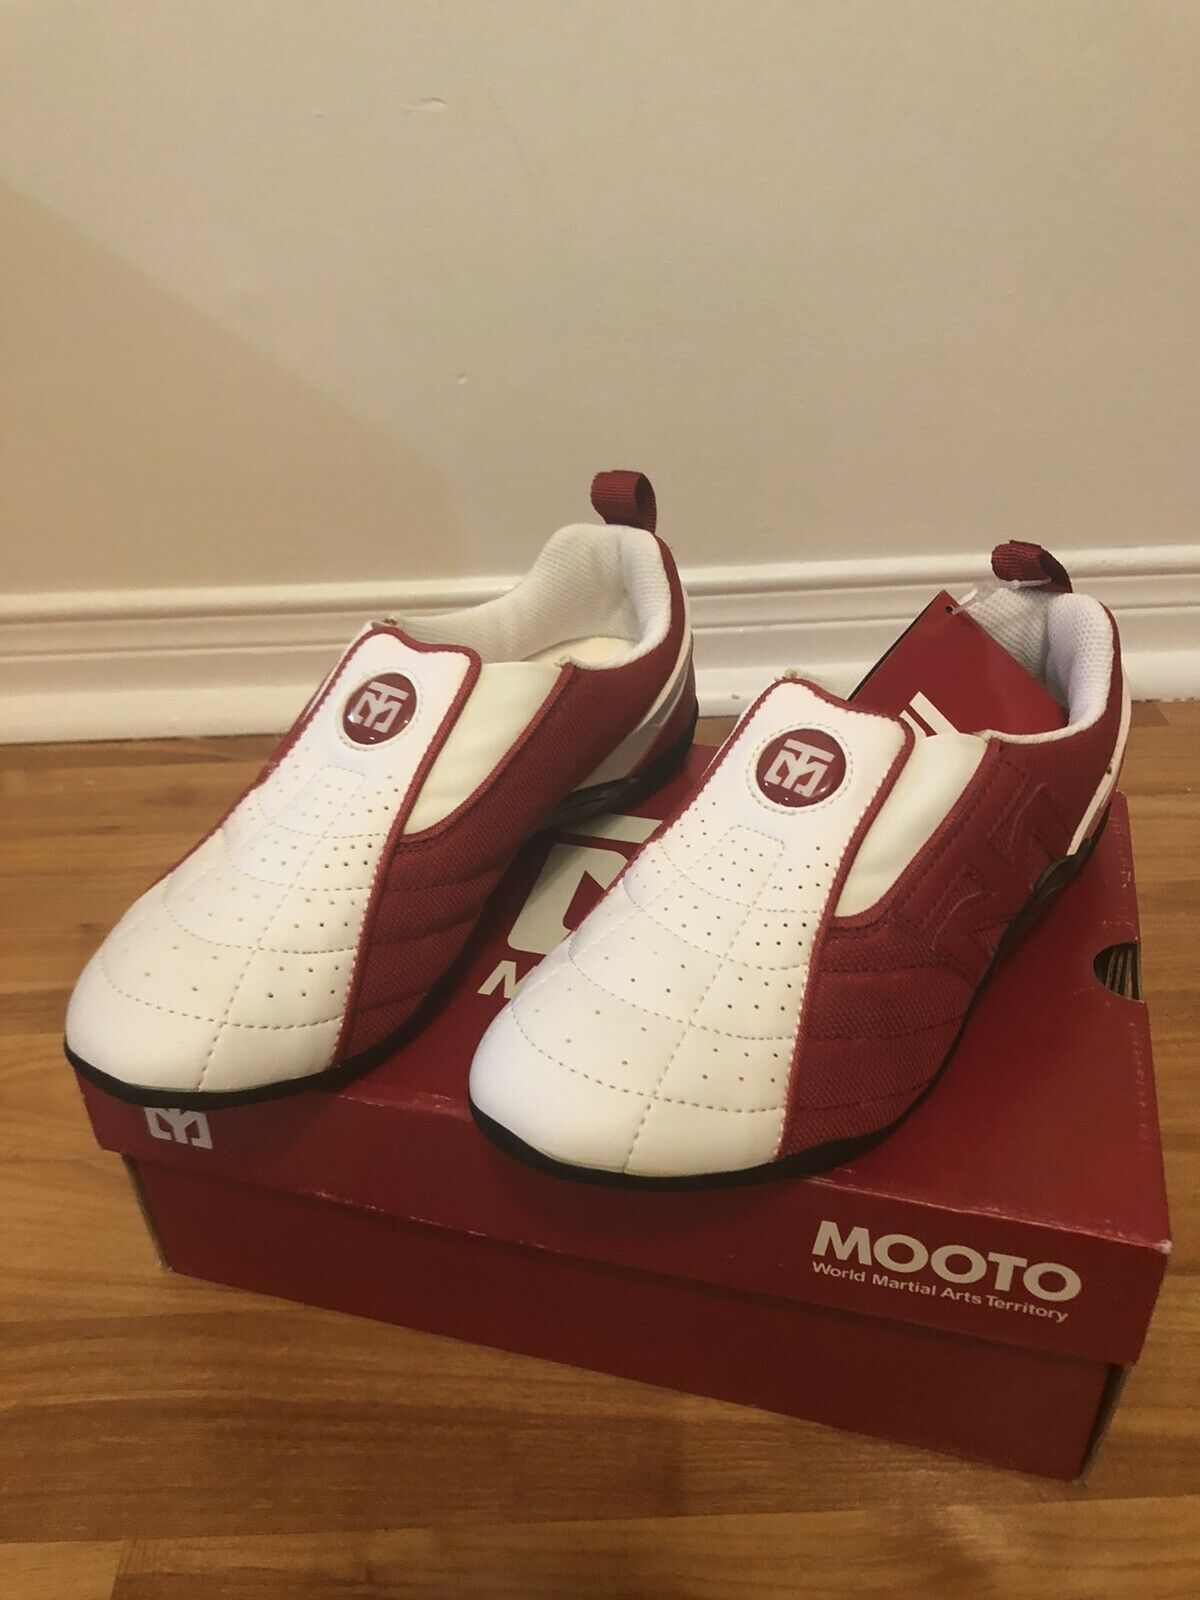 MOOTO Youth Leopard Martial Arts Taekwondo Shoes White/red Size 5.5